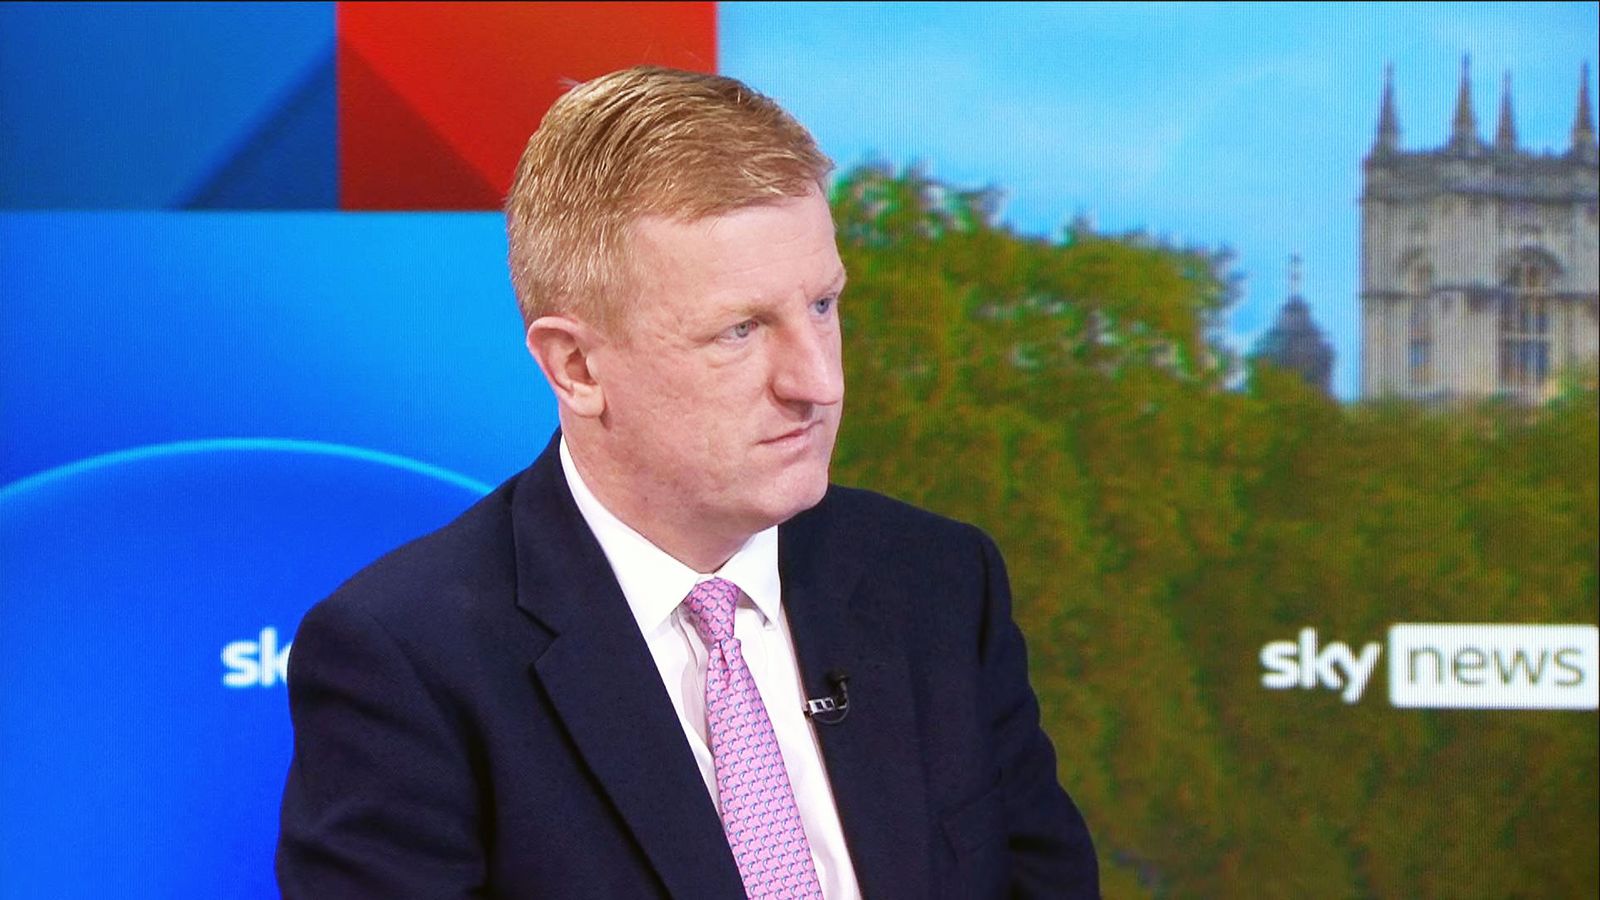 Oliver Dowden stands by PM's claim that immigration could 'overwhelm' Europe